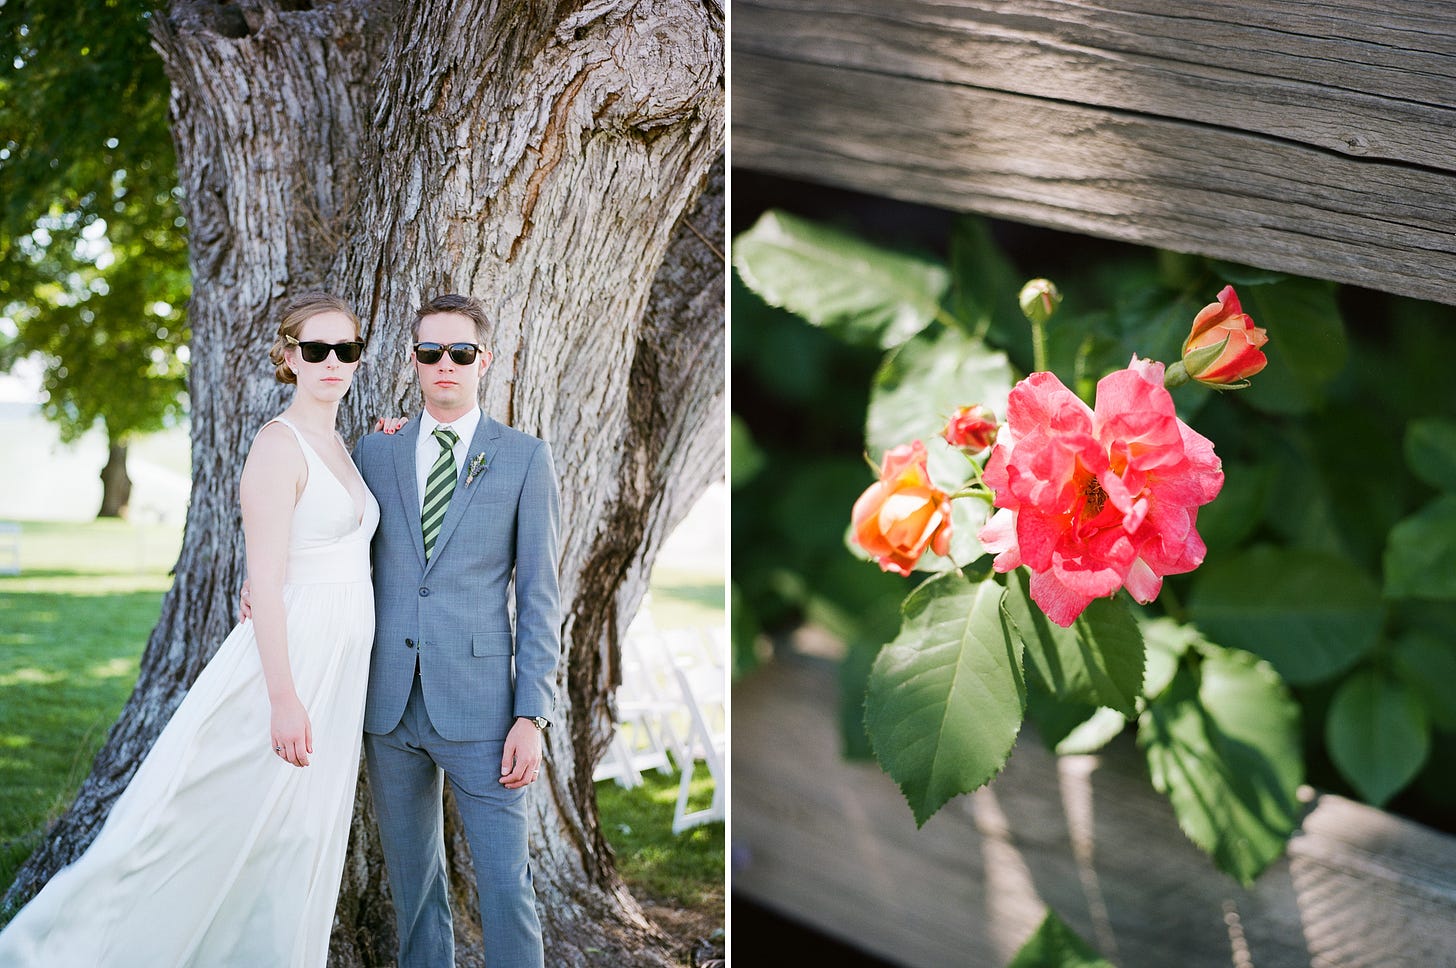 A photo diptych from my friend's wedding, with the bride and groom alongside a photo of a flower